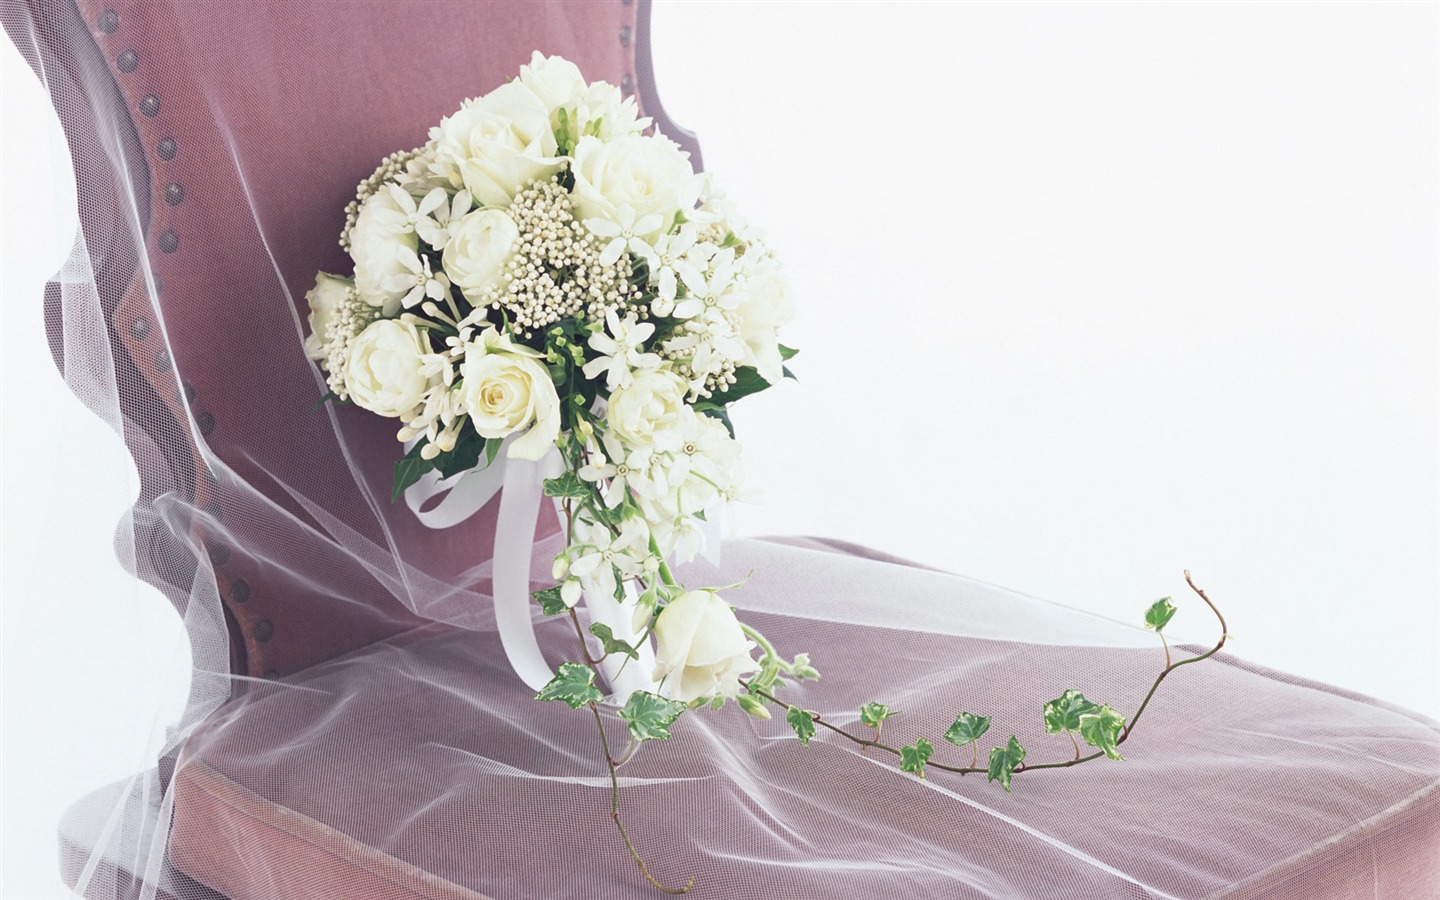 Weddings and Flowers wallpaper (1) #7 - 1440x900